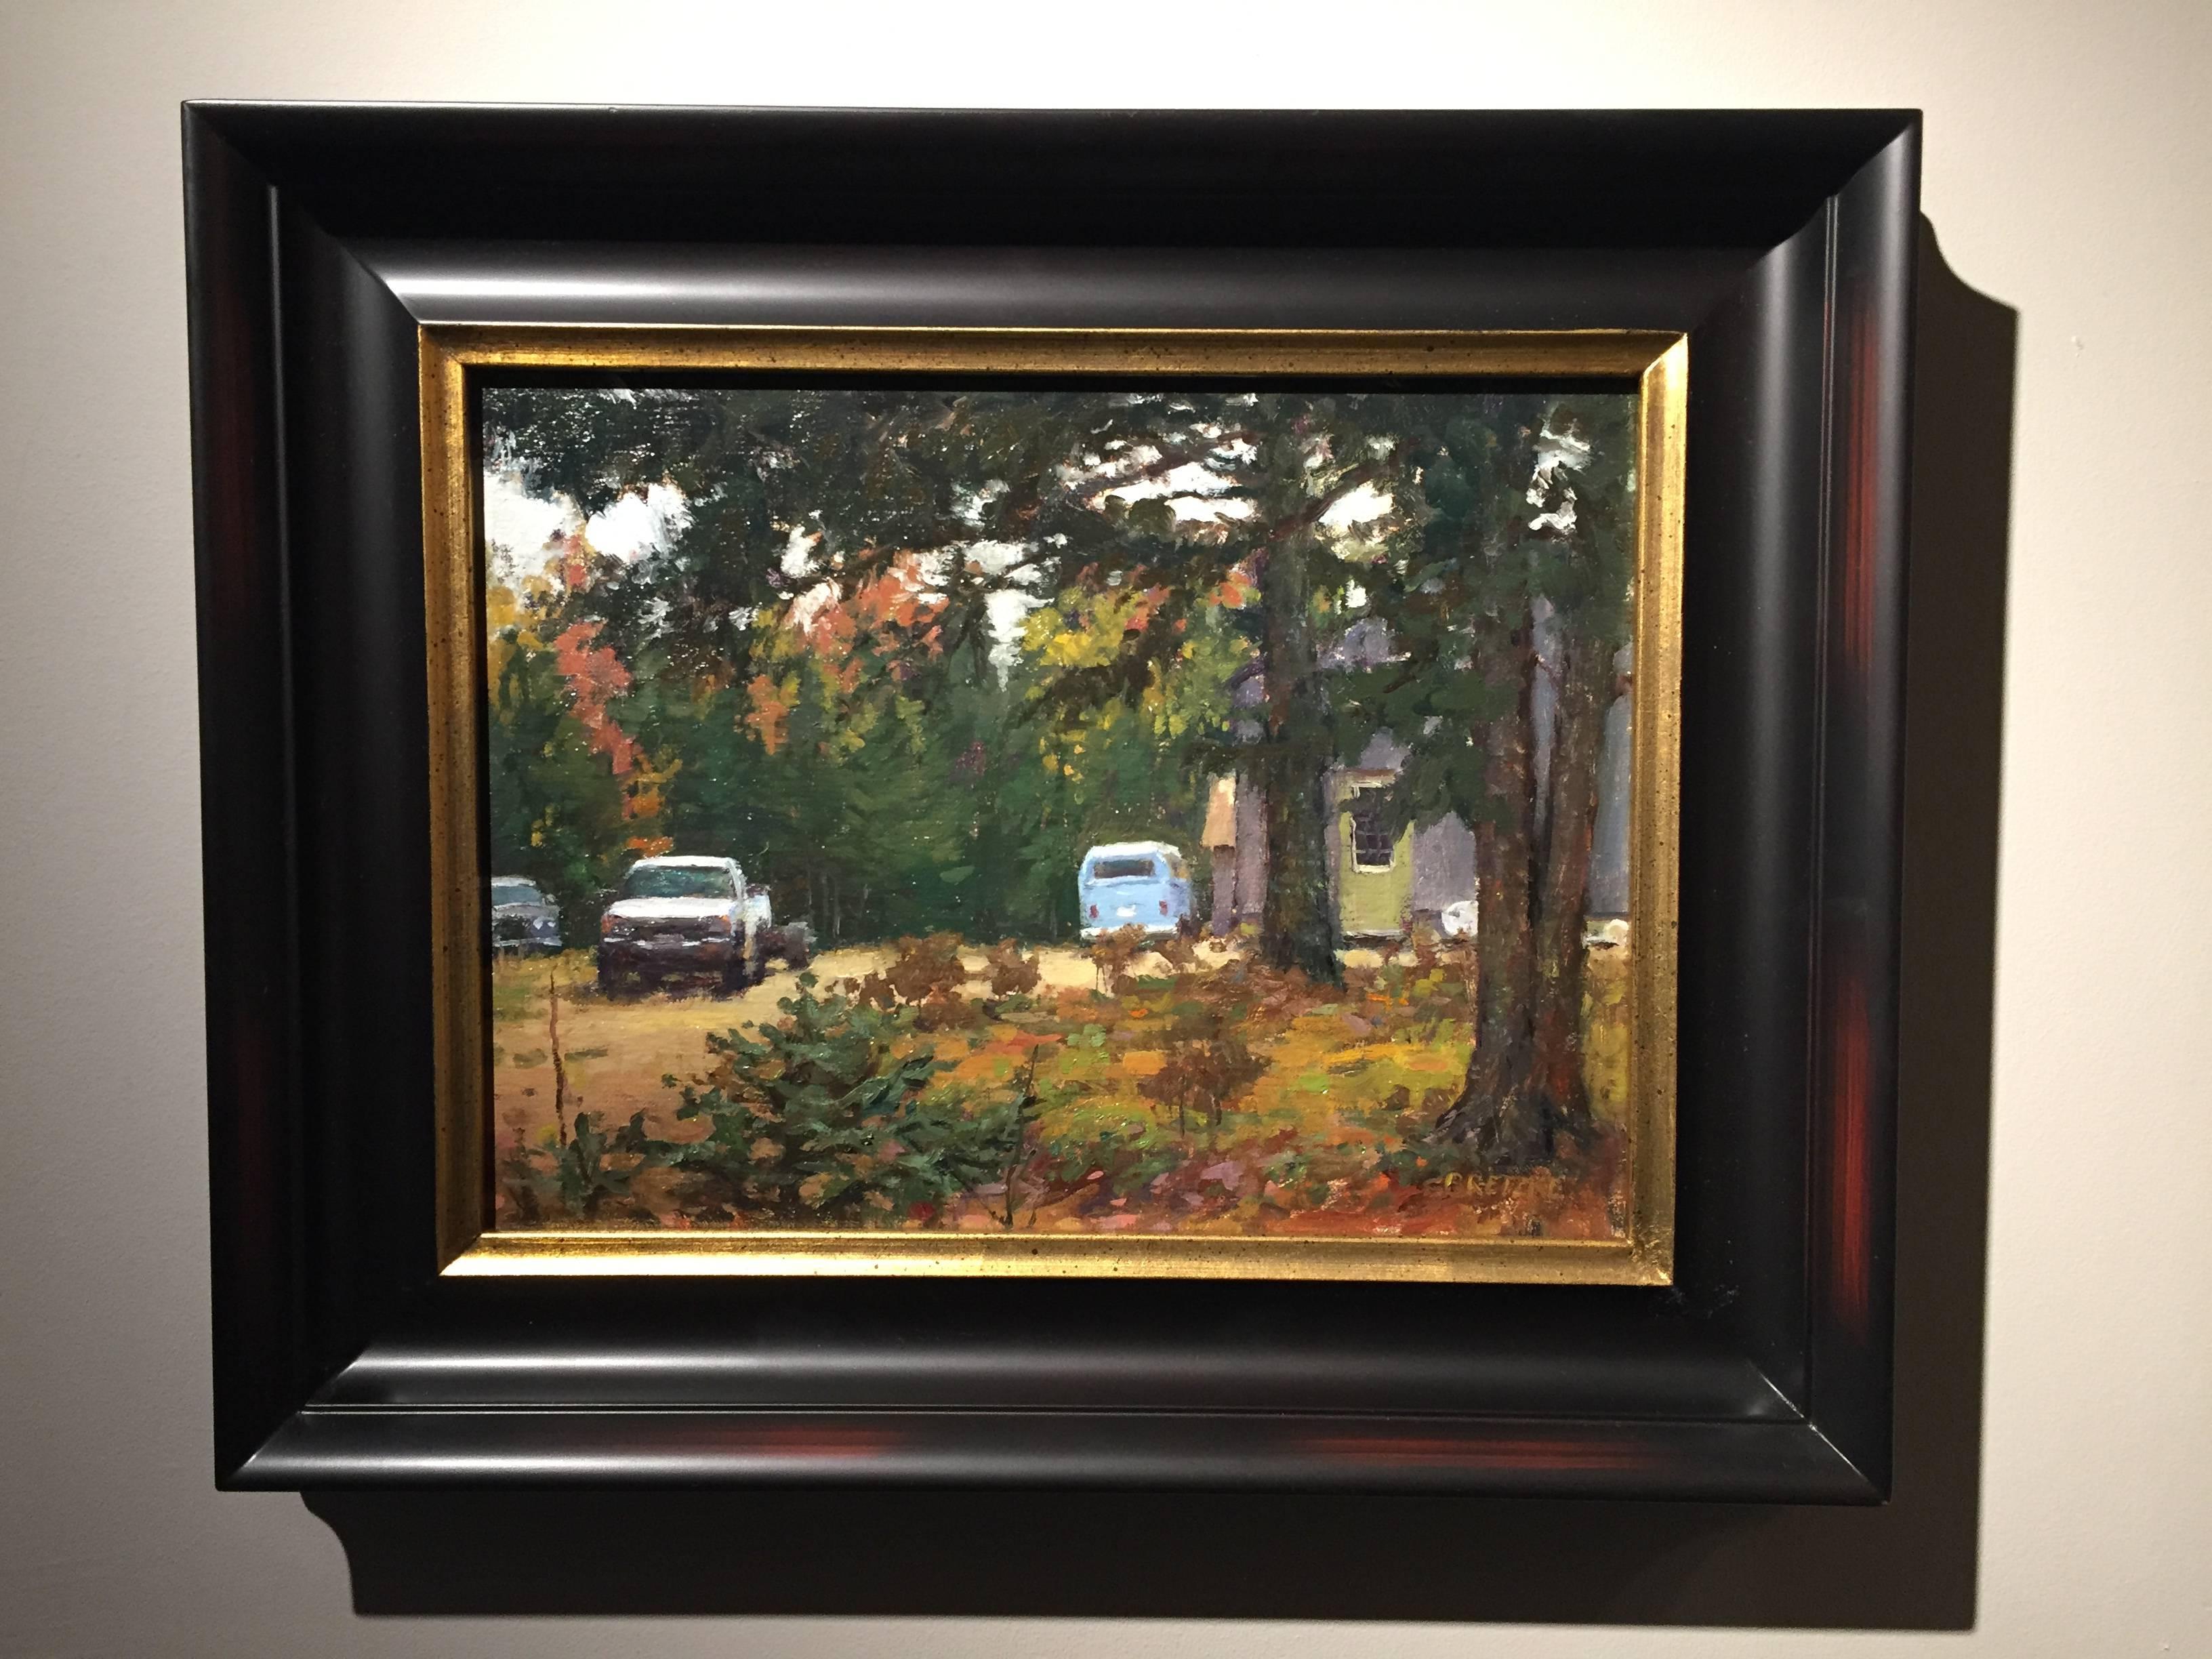 VW Bus in the Woods - Painting by Carl Bretzke